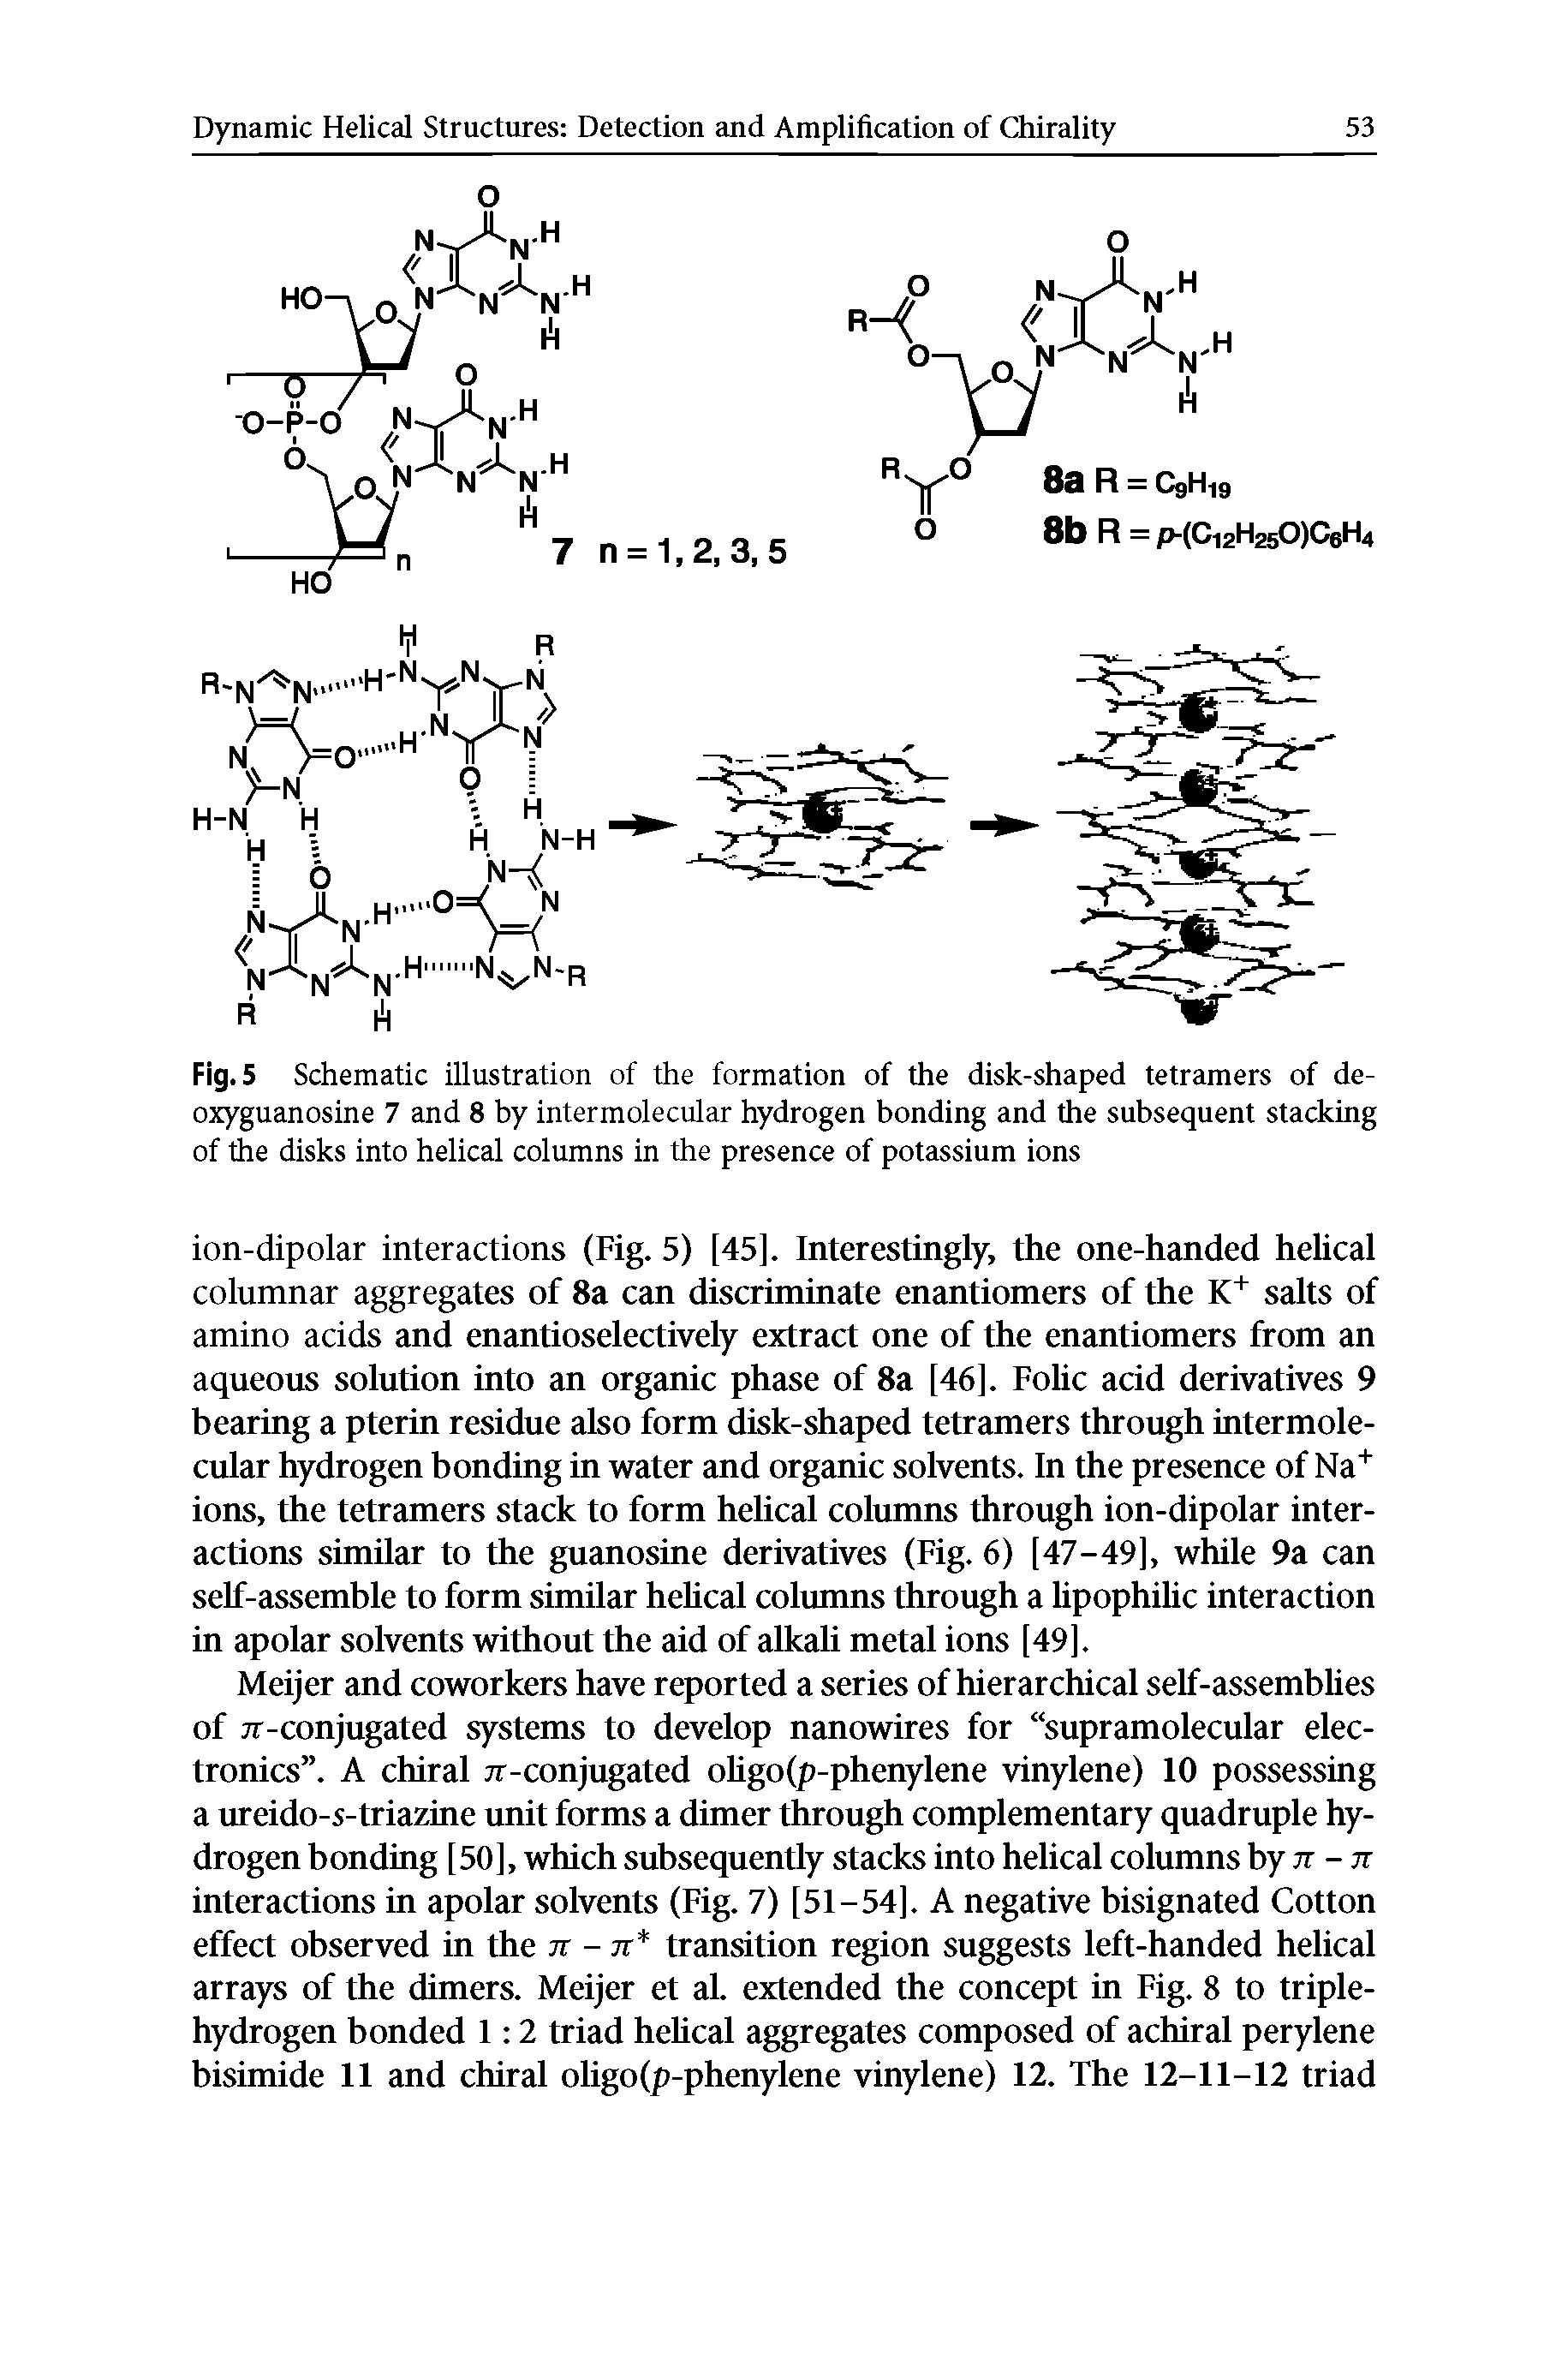 Fig. 5 Schematic illustration of the formation of the disk-shaped tetramers of de-oxyguanosine 7 and 8 by intermolecular hydrogen bonding and the subsequent stacking of the disks into helical columns in the presence of potassium ions...